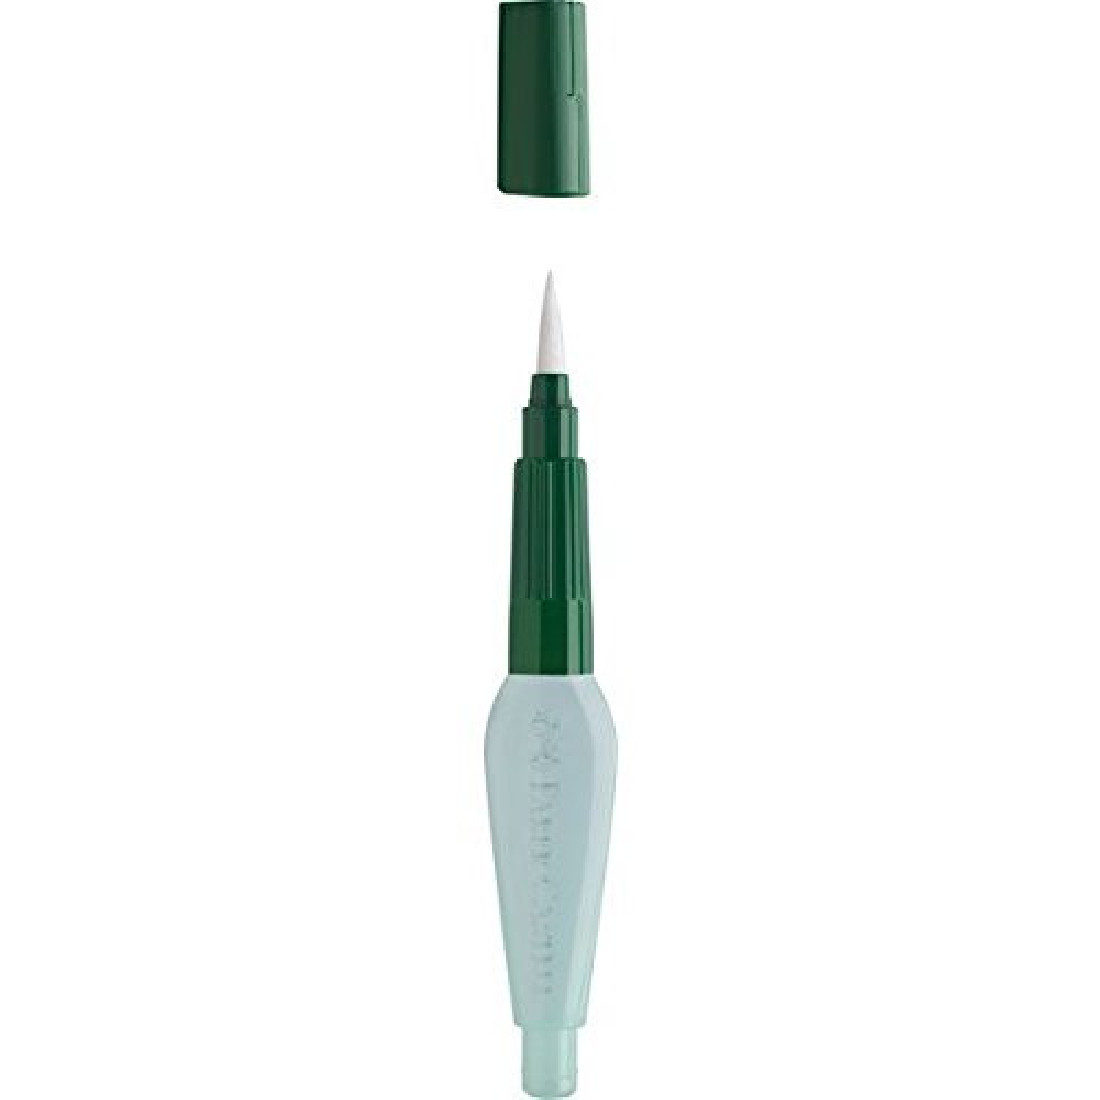 Faber Castell Art & Graphic Water Brush M 185105